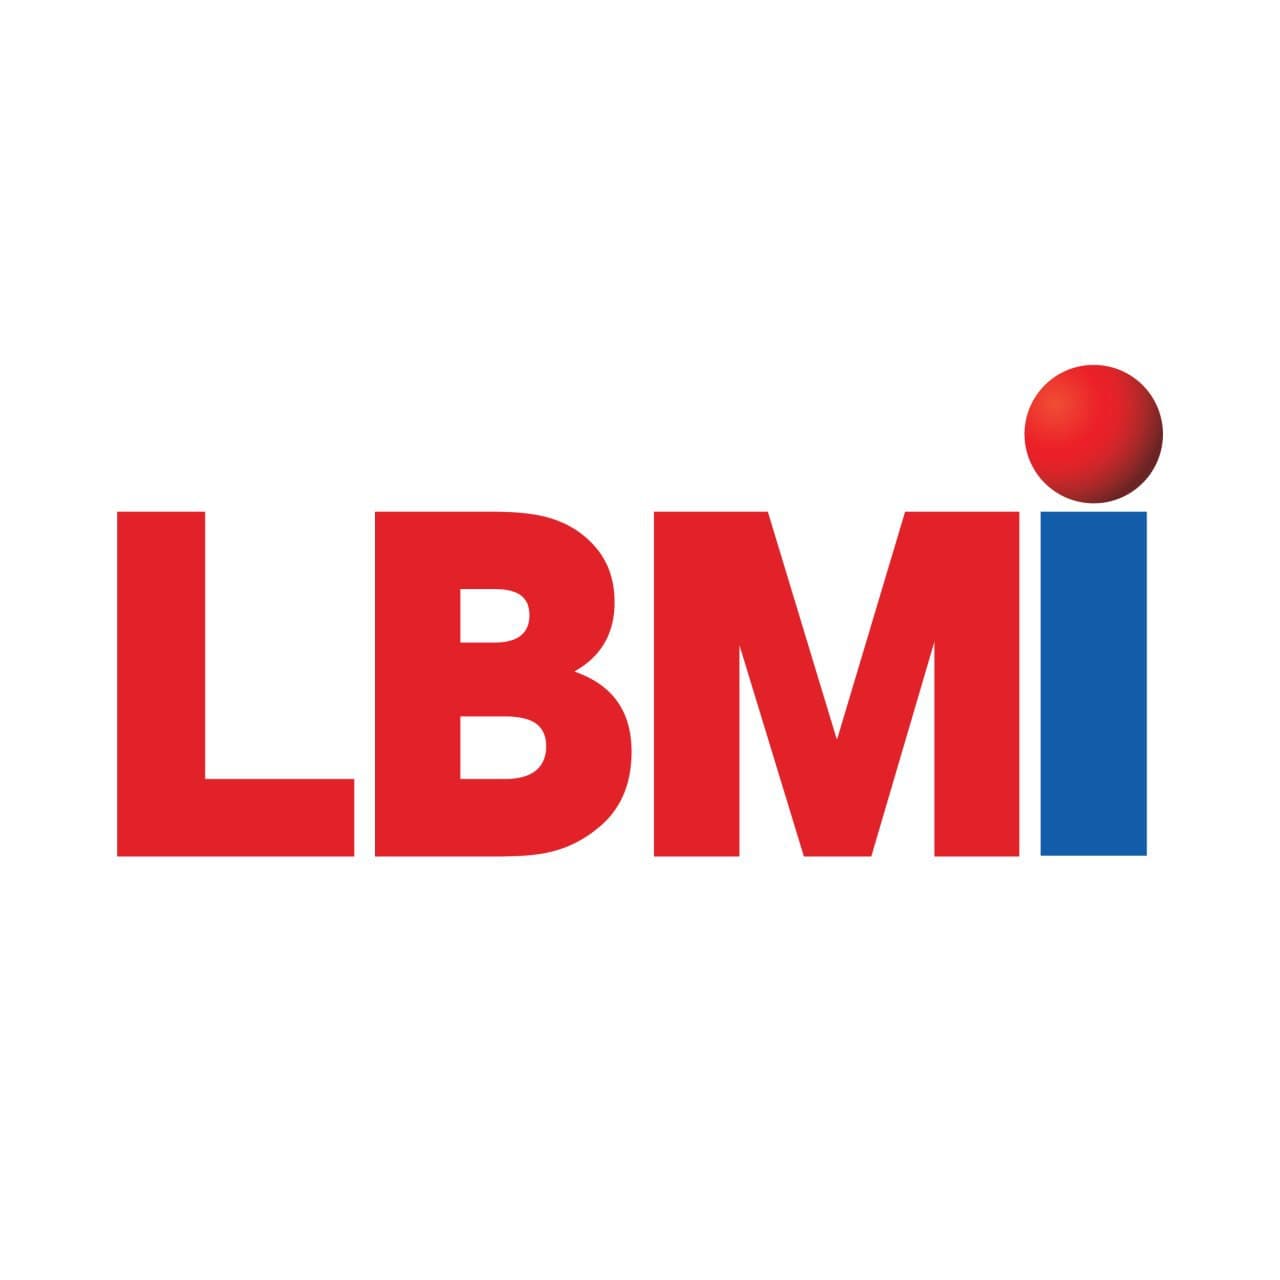 LBM – We bring the best solutions